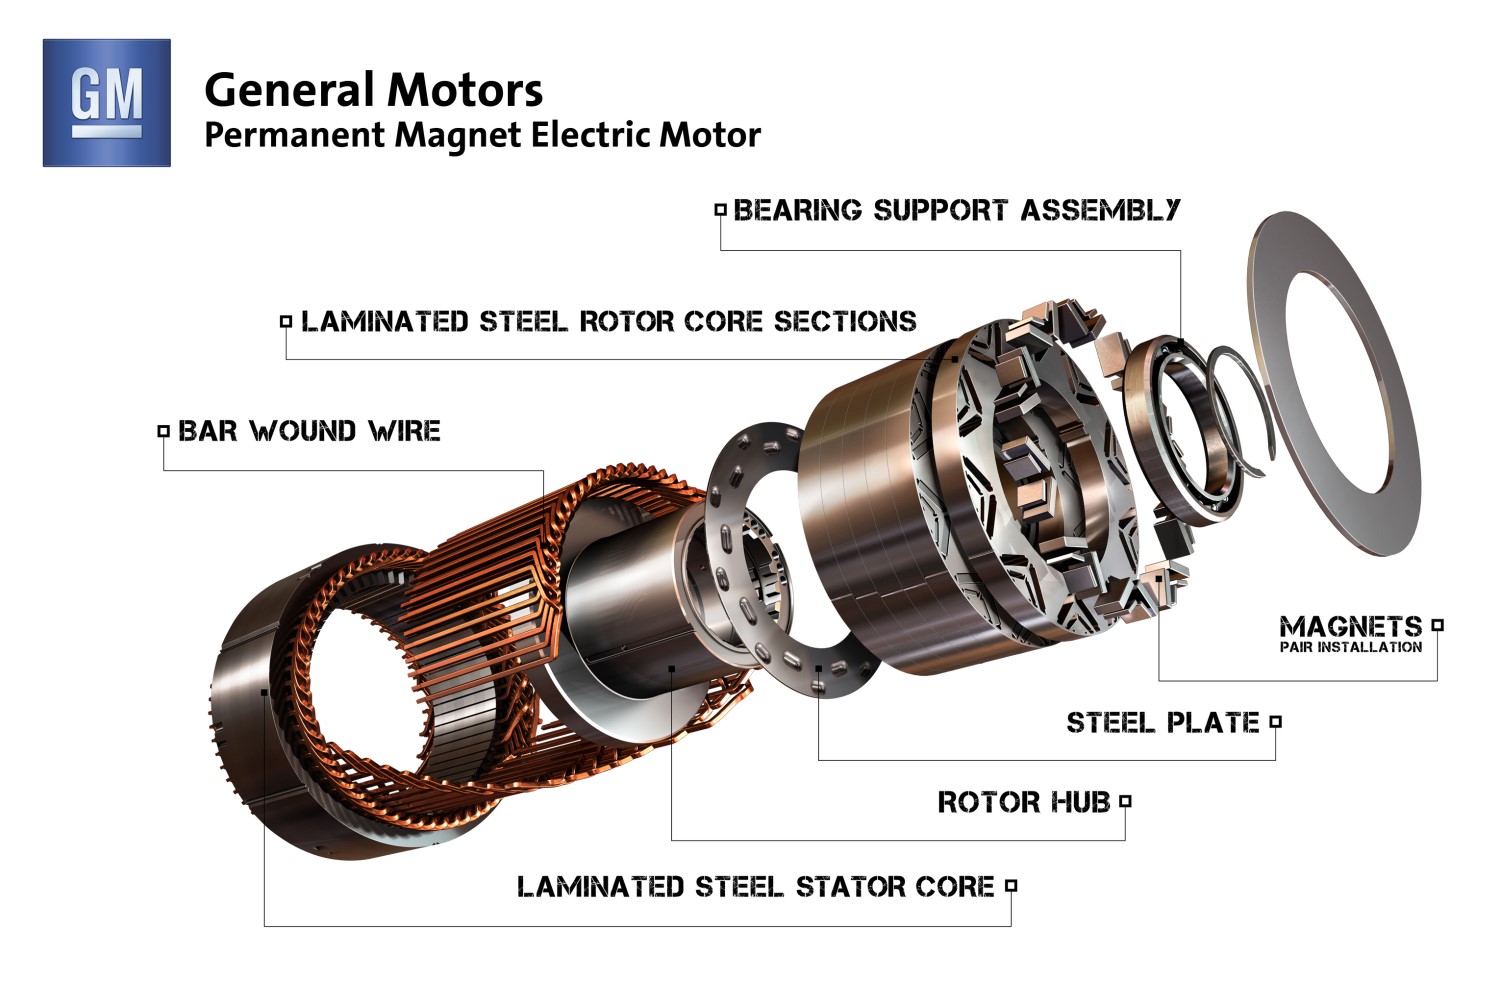 One of Chevy's existing electric motors